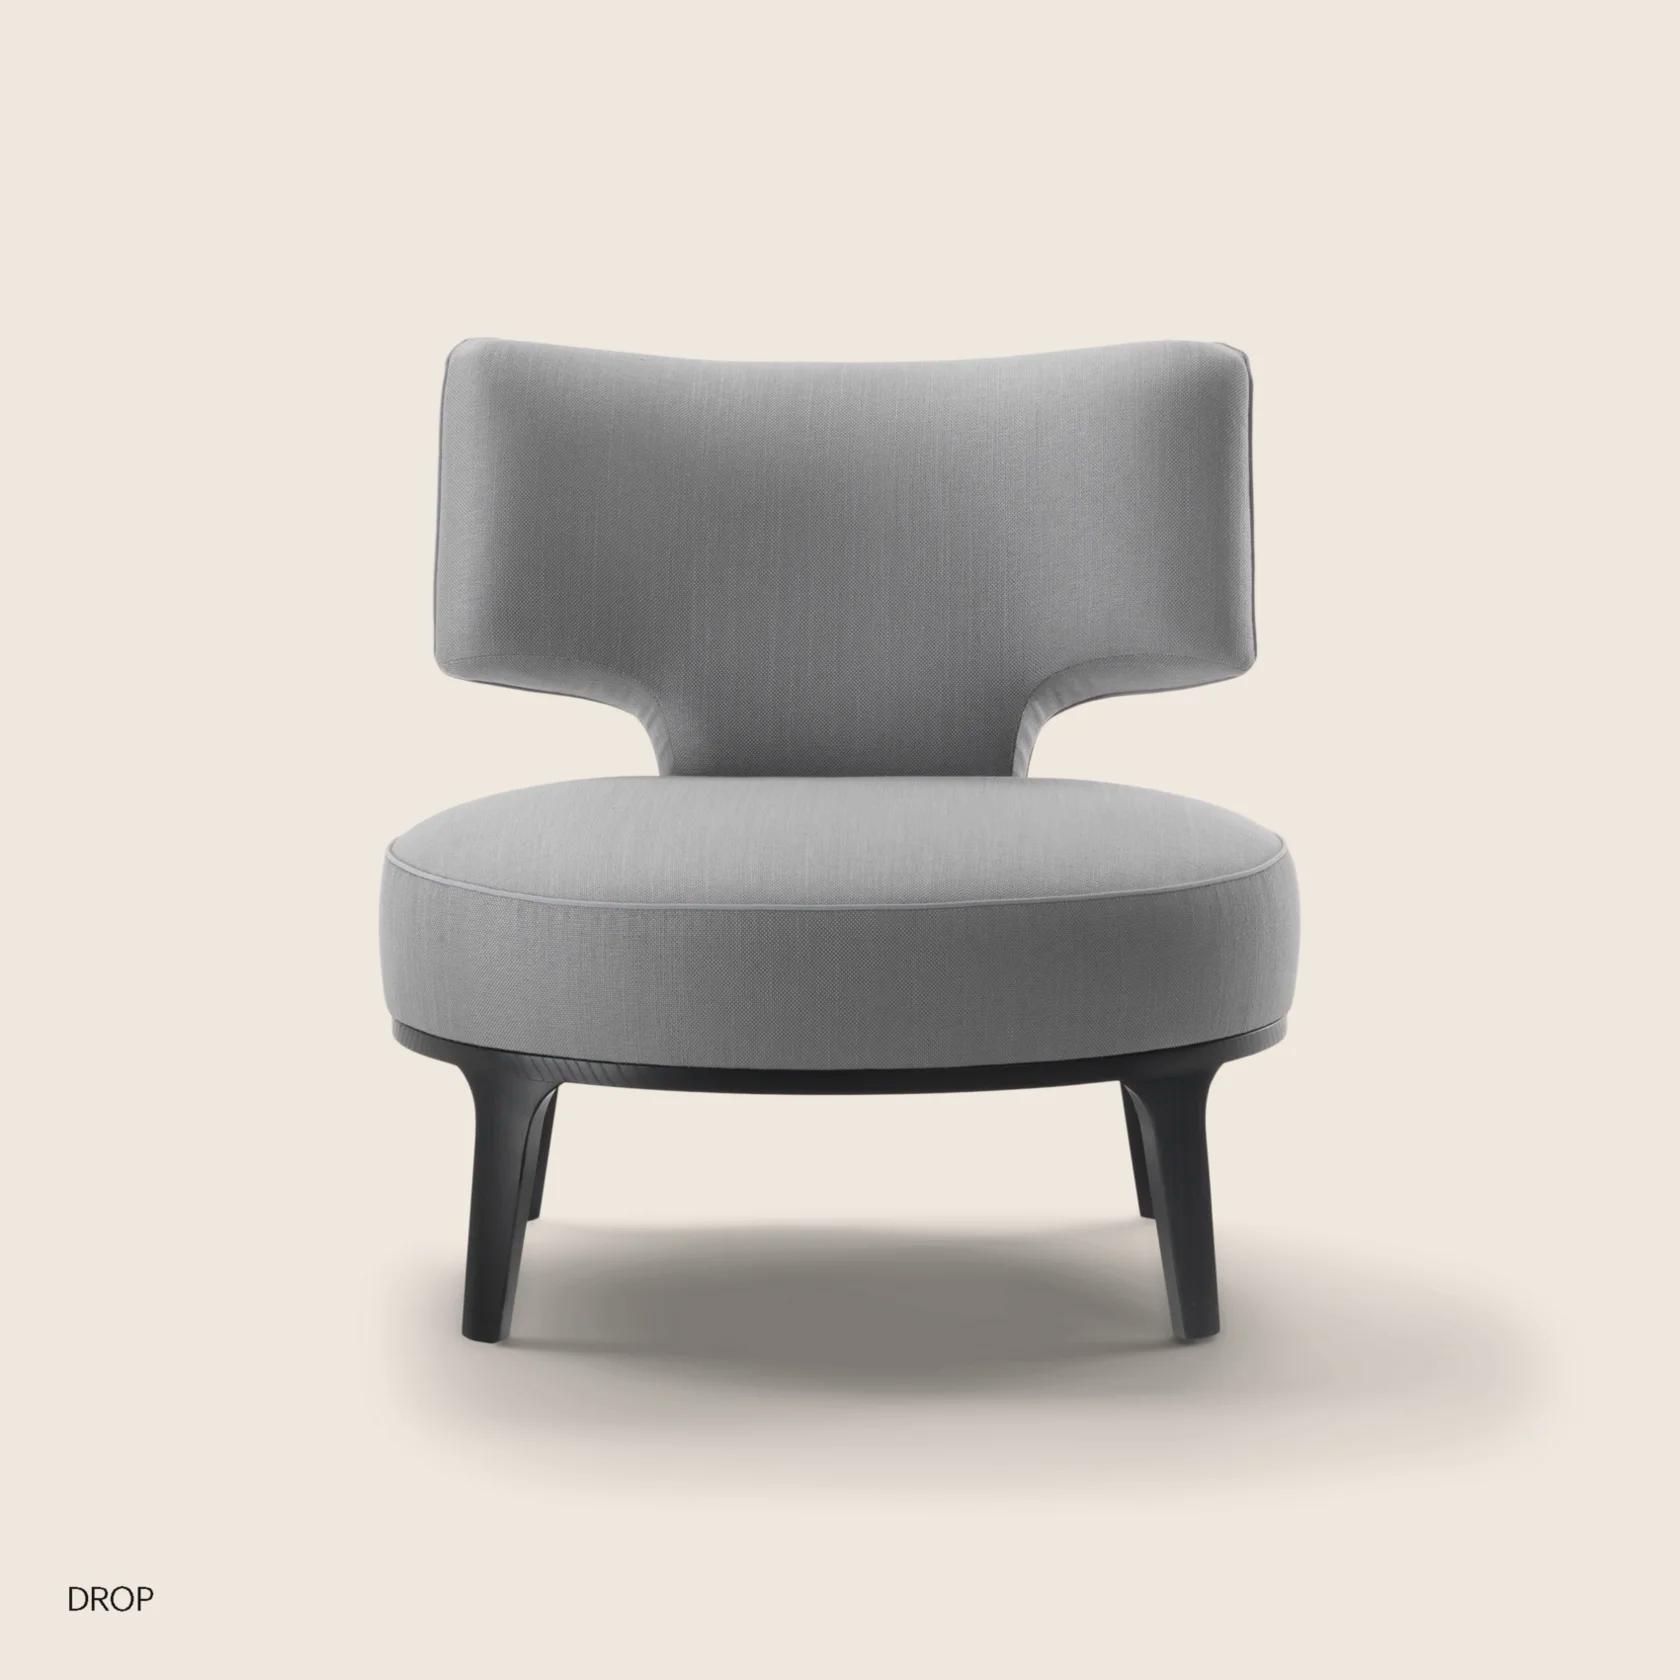 01IT11_DROP_ARMCHAIR_02_dida.png